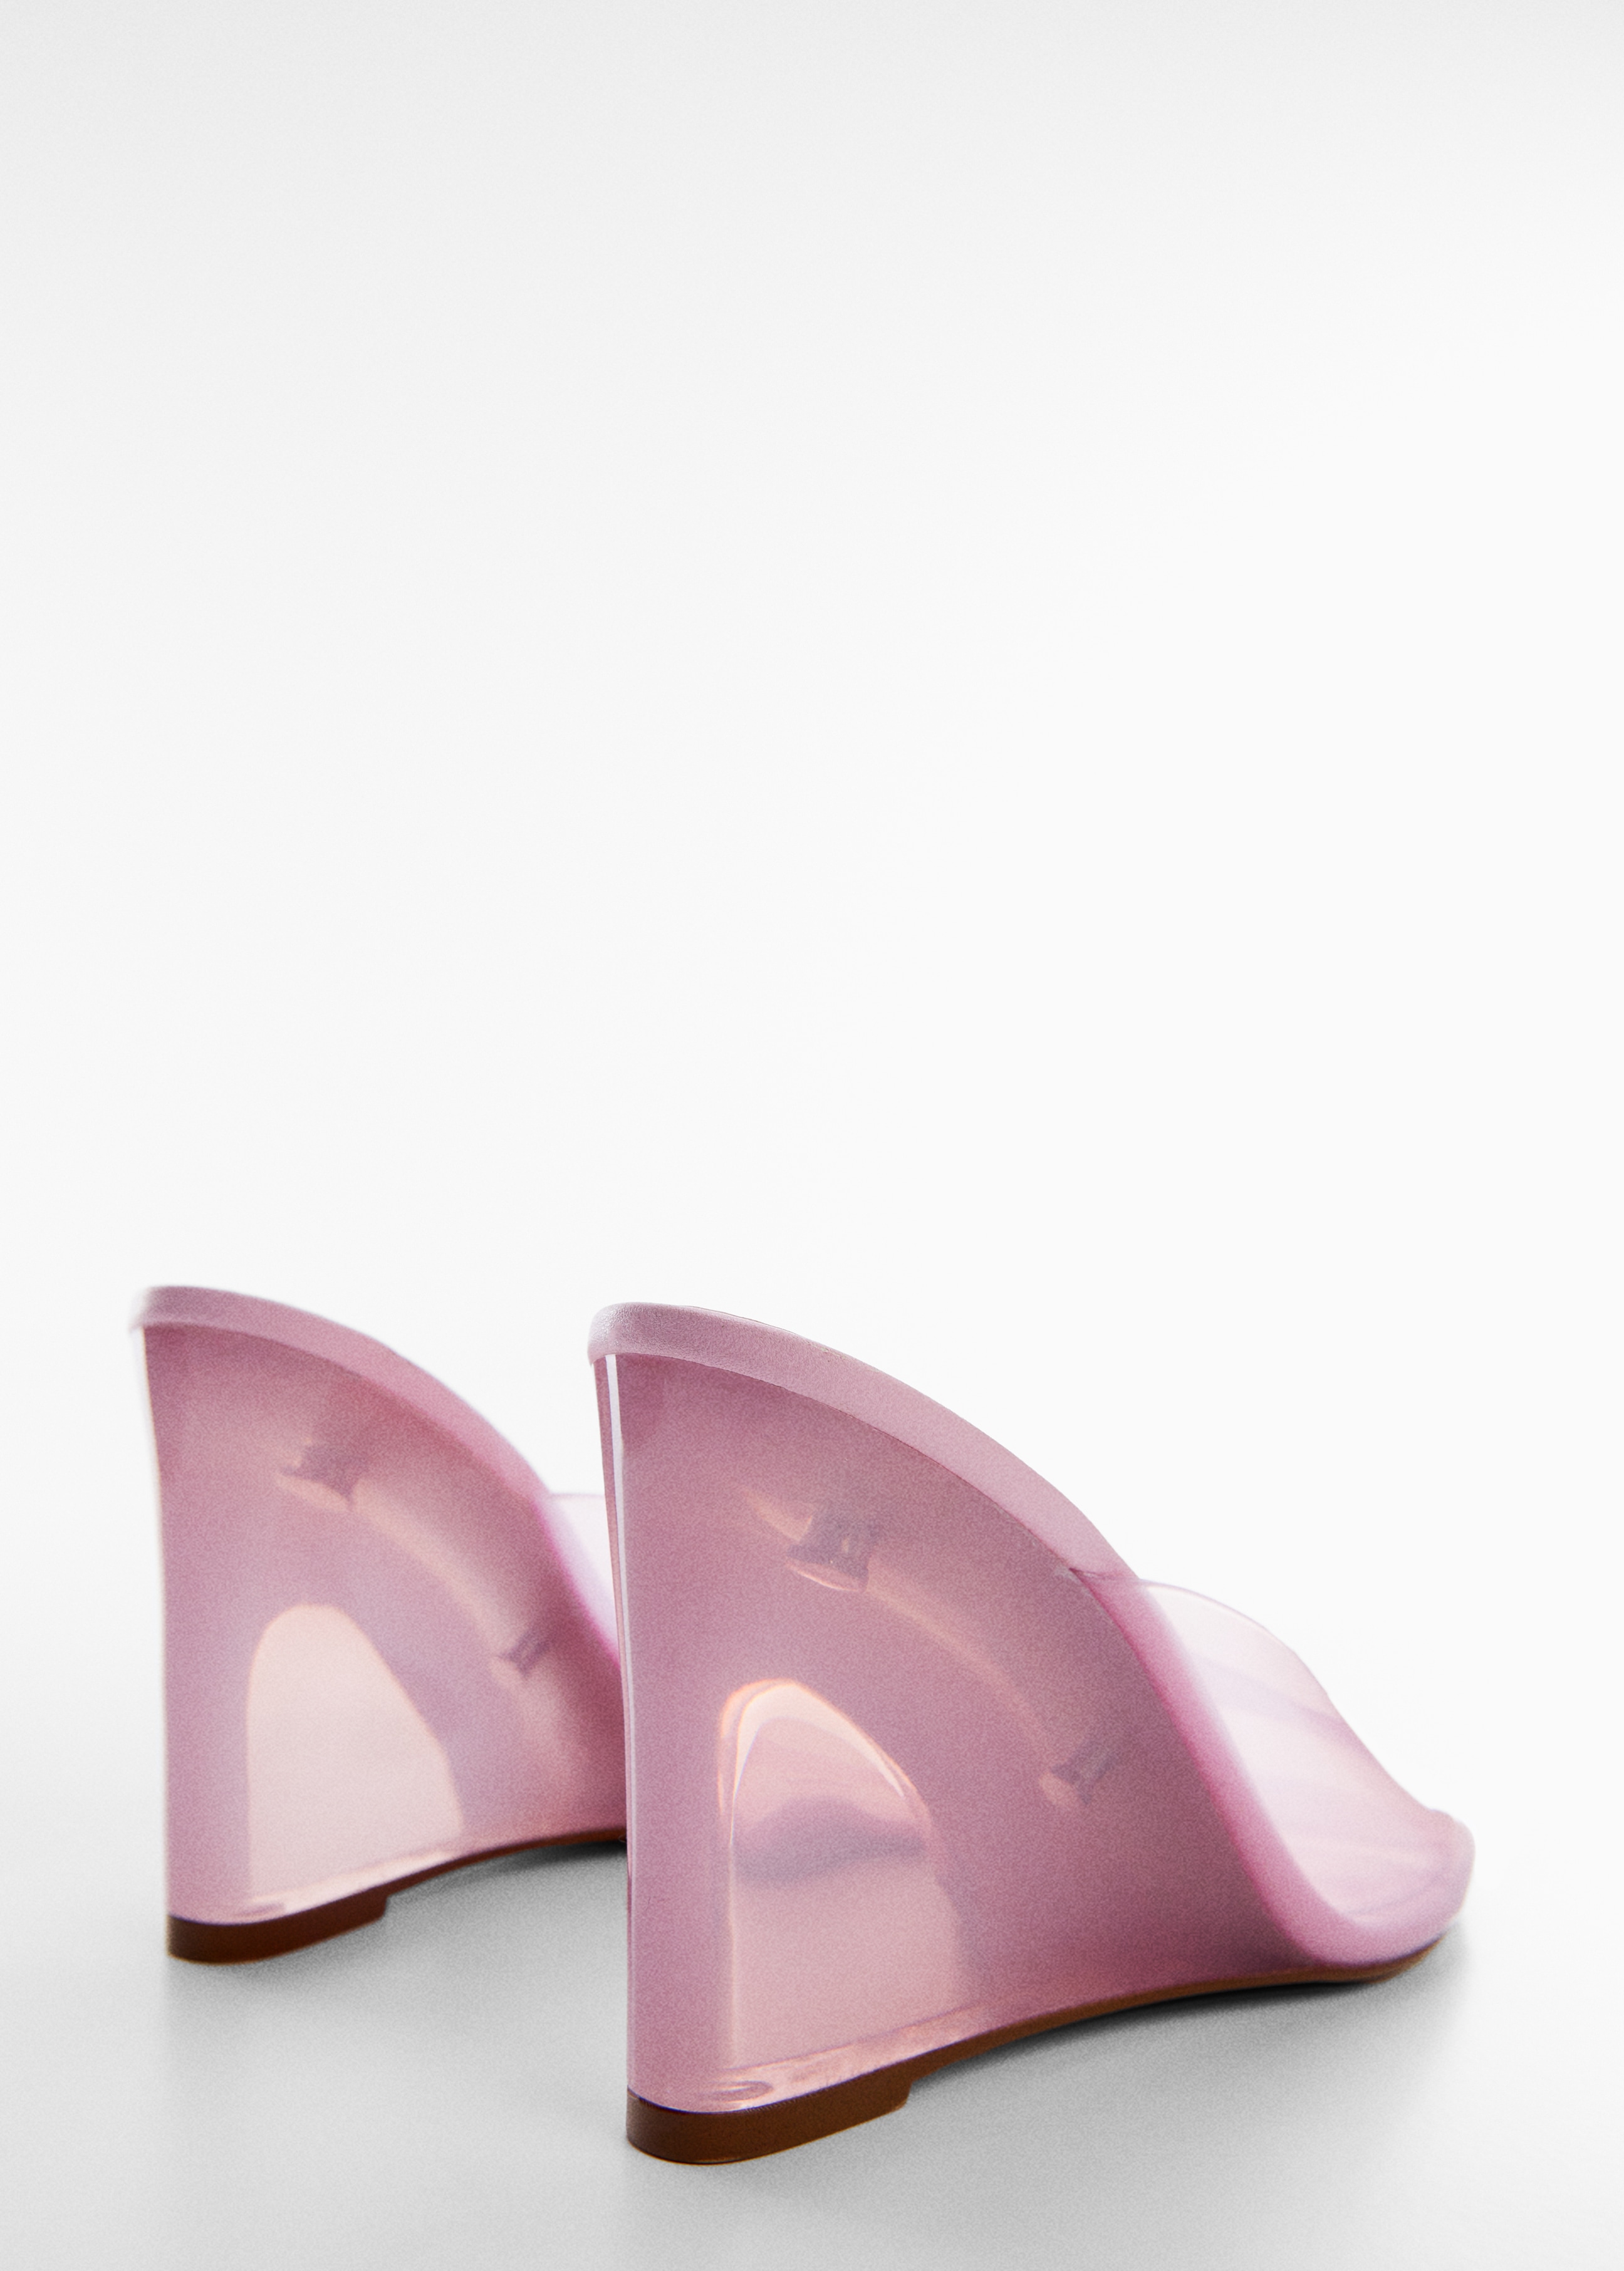 Vinyl wedge sandals - Details of the article 1